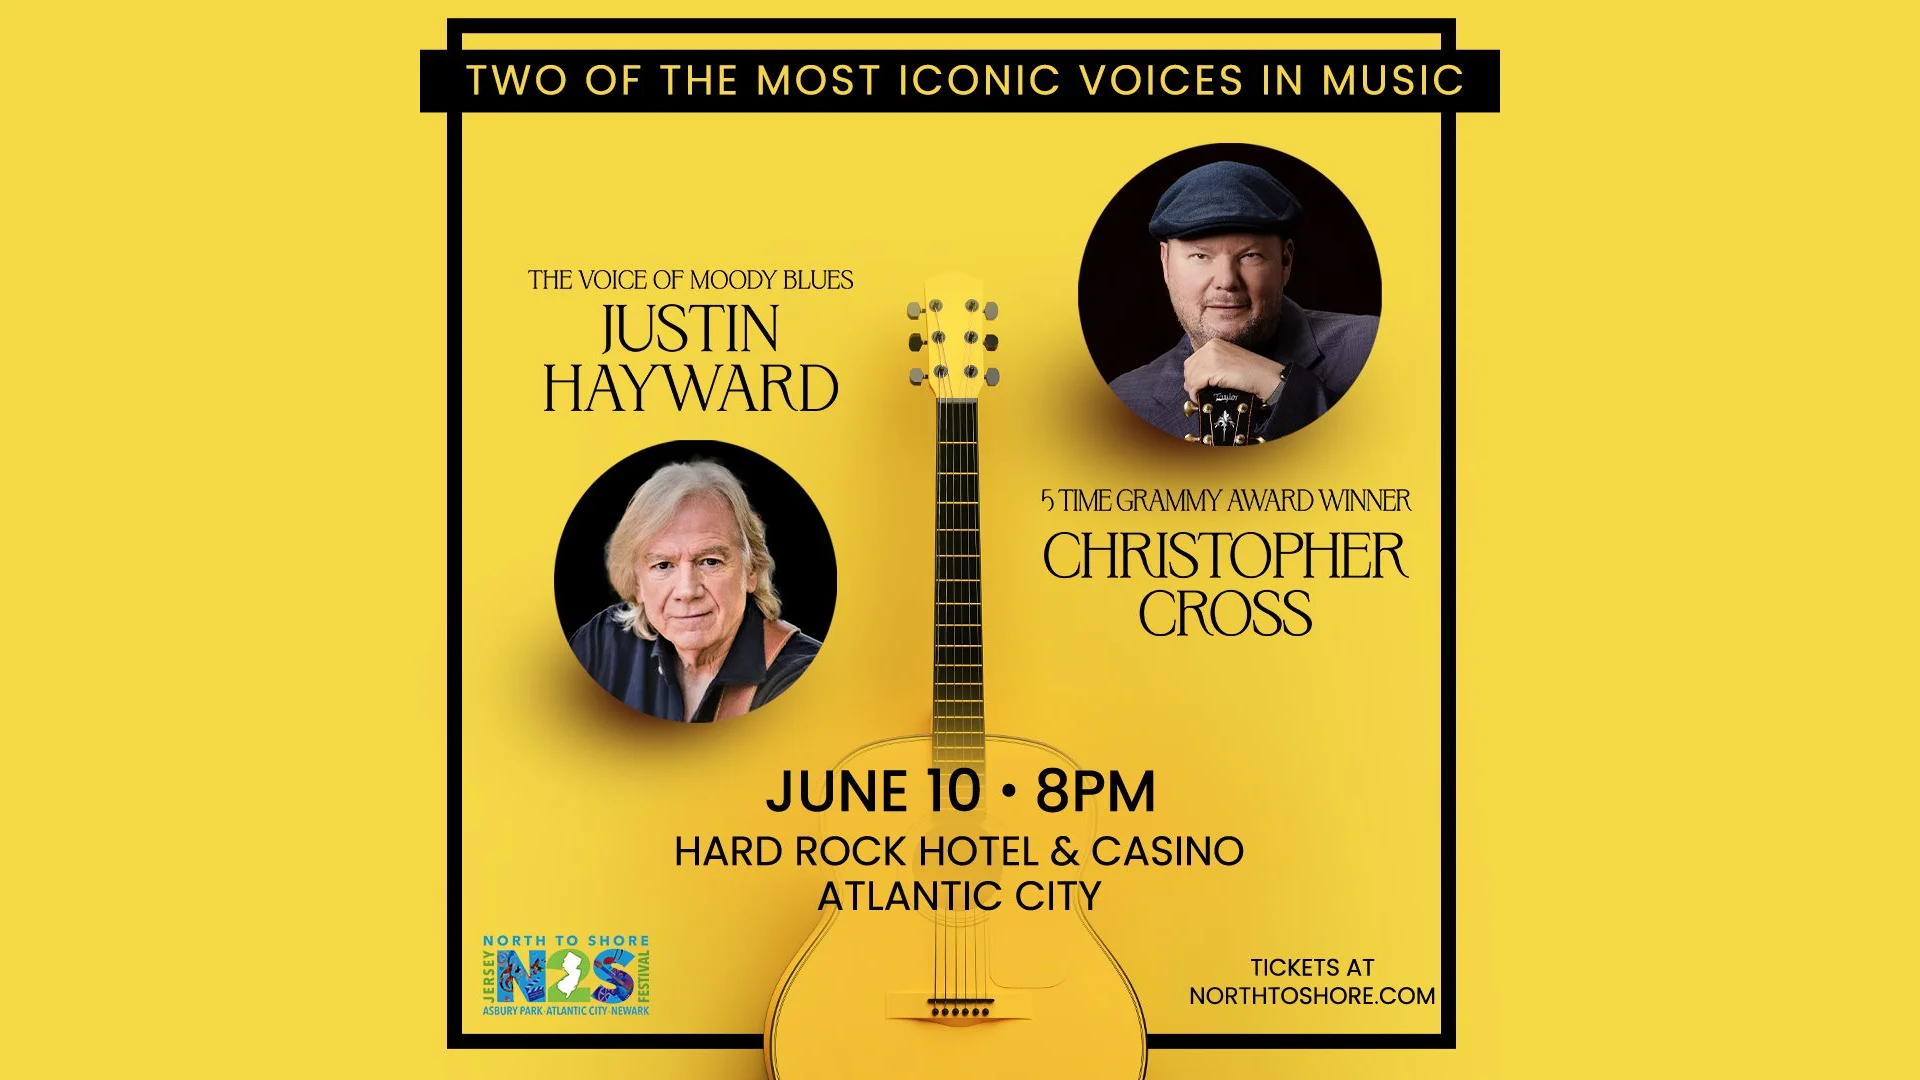 Christopher Cross and Justin Hayward